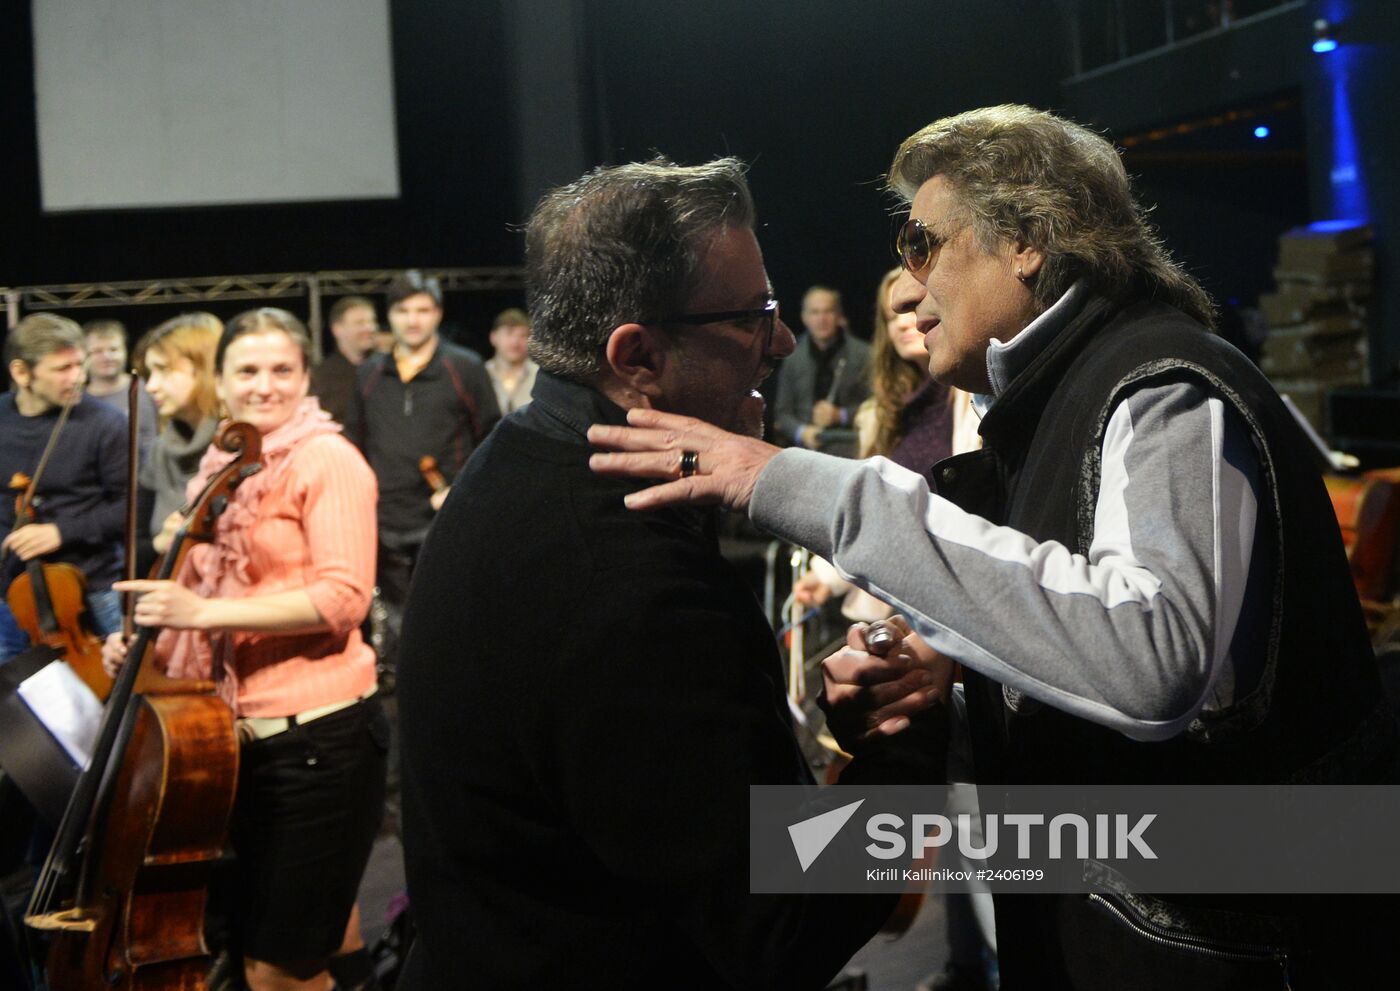 Rehearsal of Toto Cutugno's jubilee concert